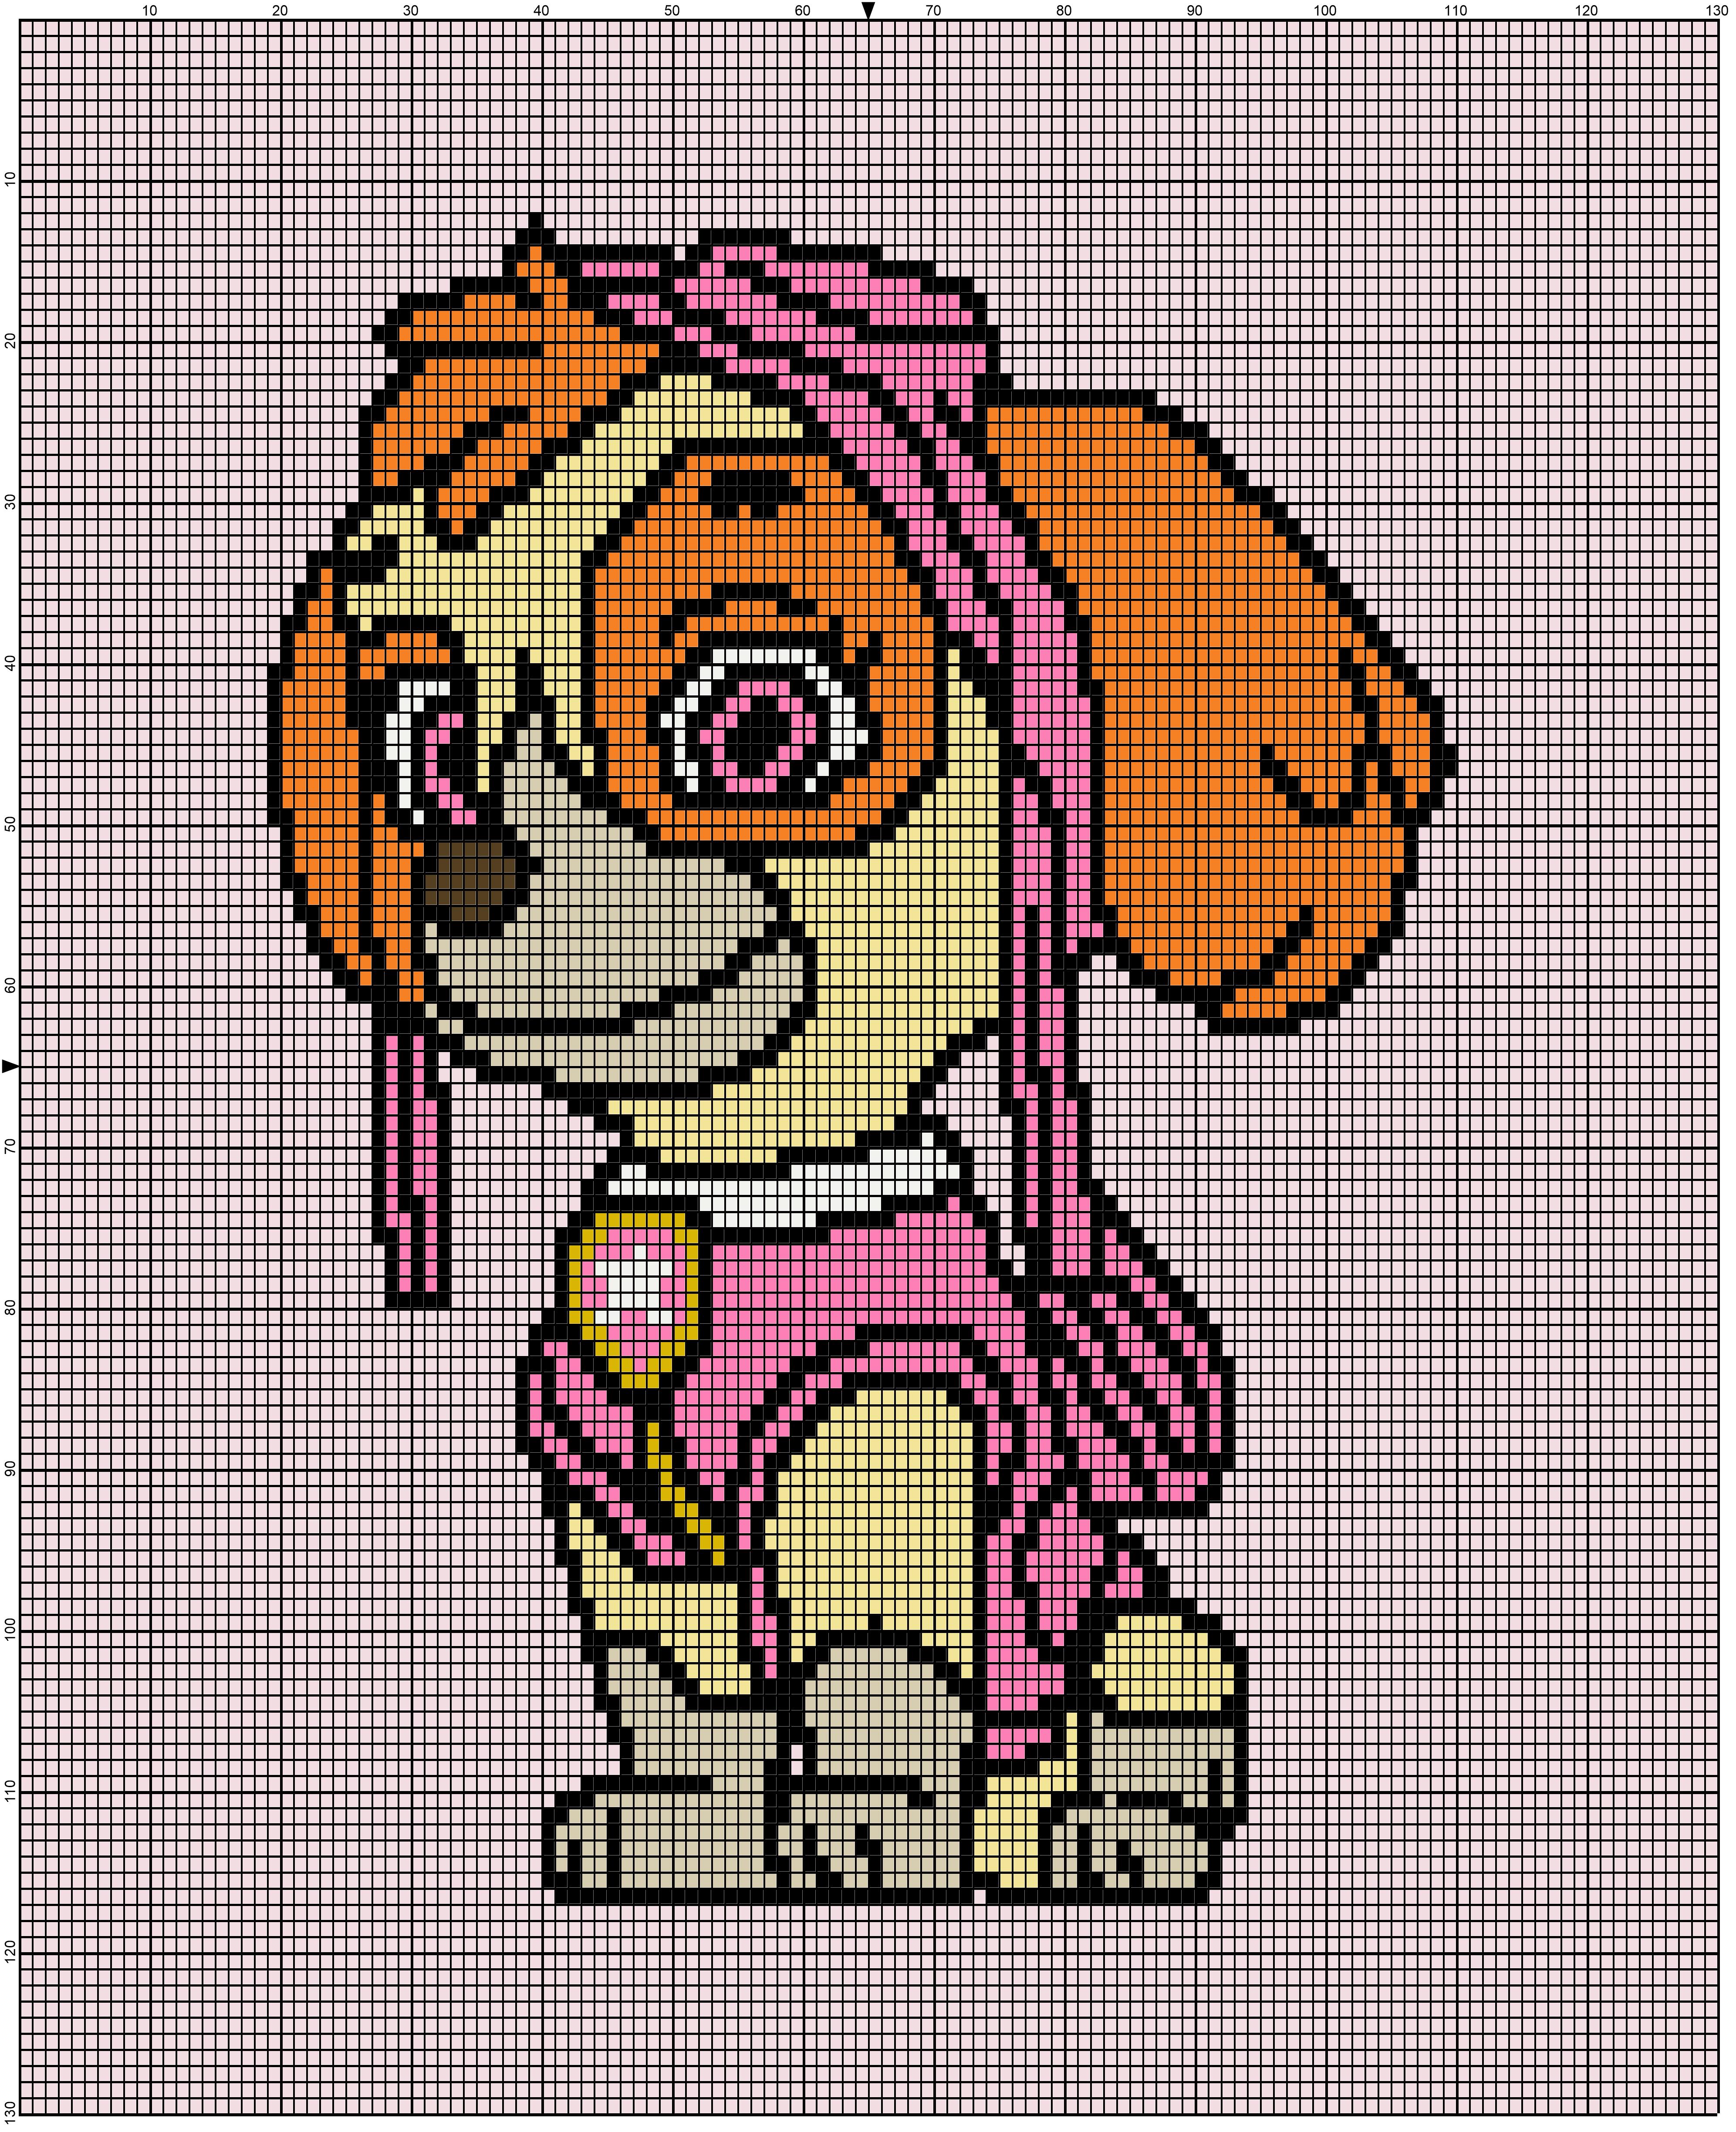 paw patrol chase and marshall cross stitch graph